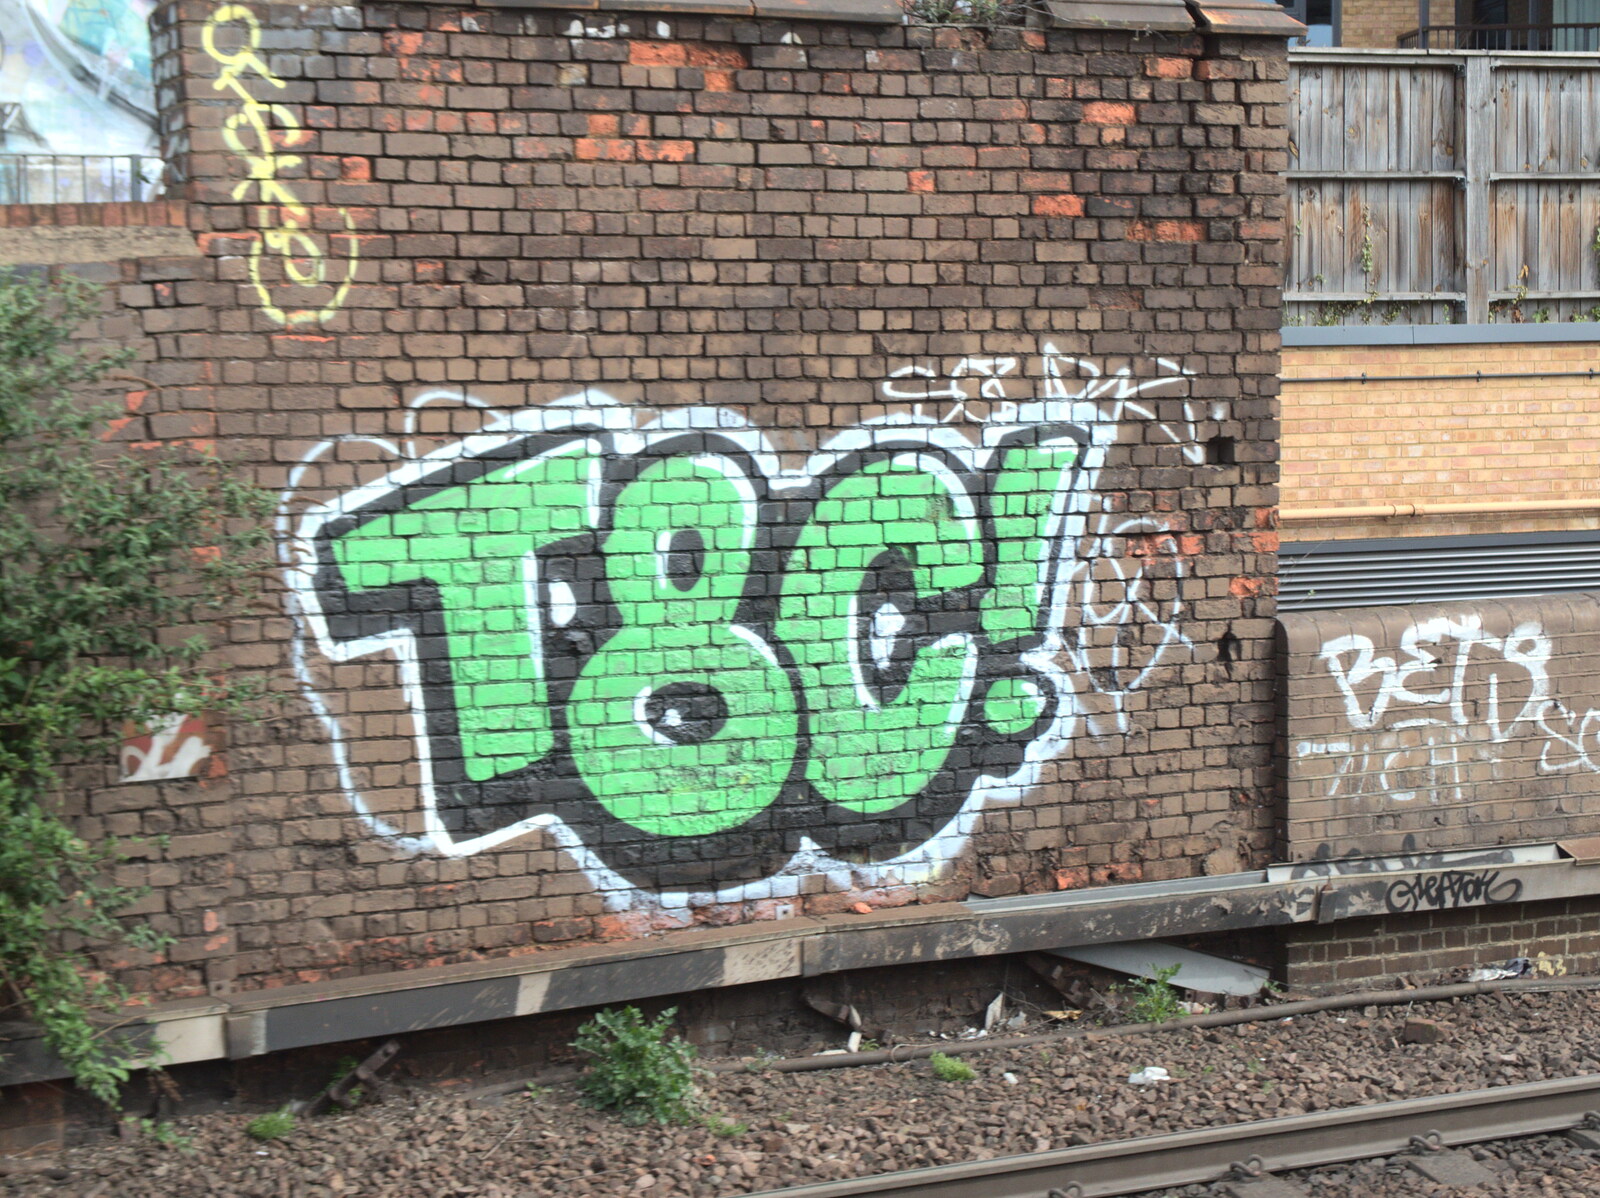 The T8C tag from Commonwealth Chaos, and the BSCC at Gissing, London and Norfolk - 18th April 2018